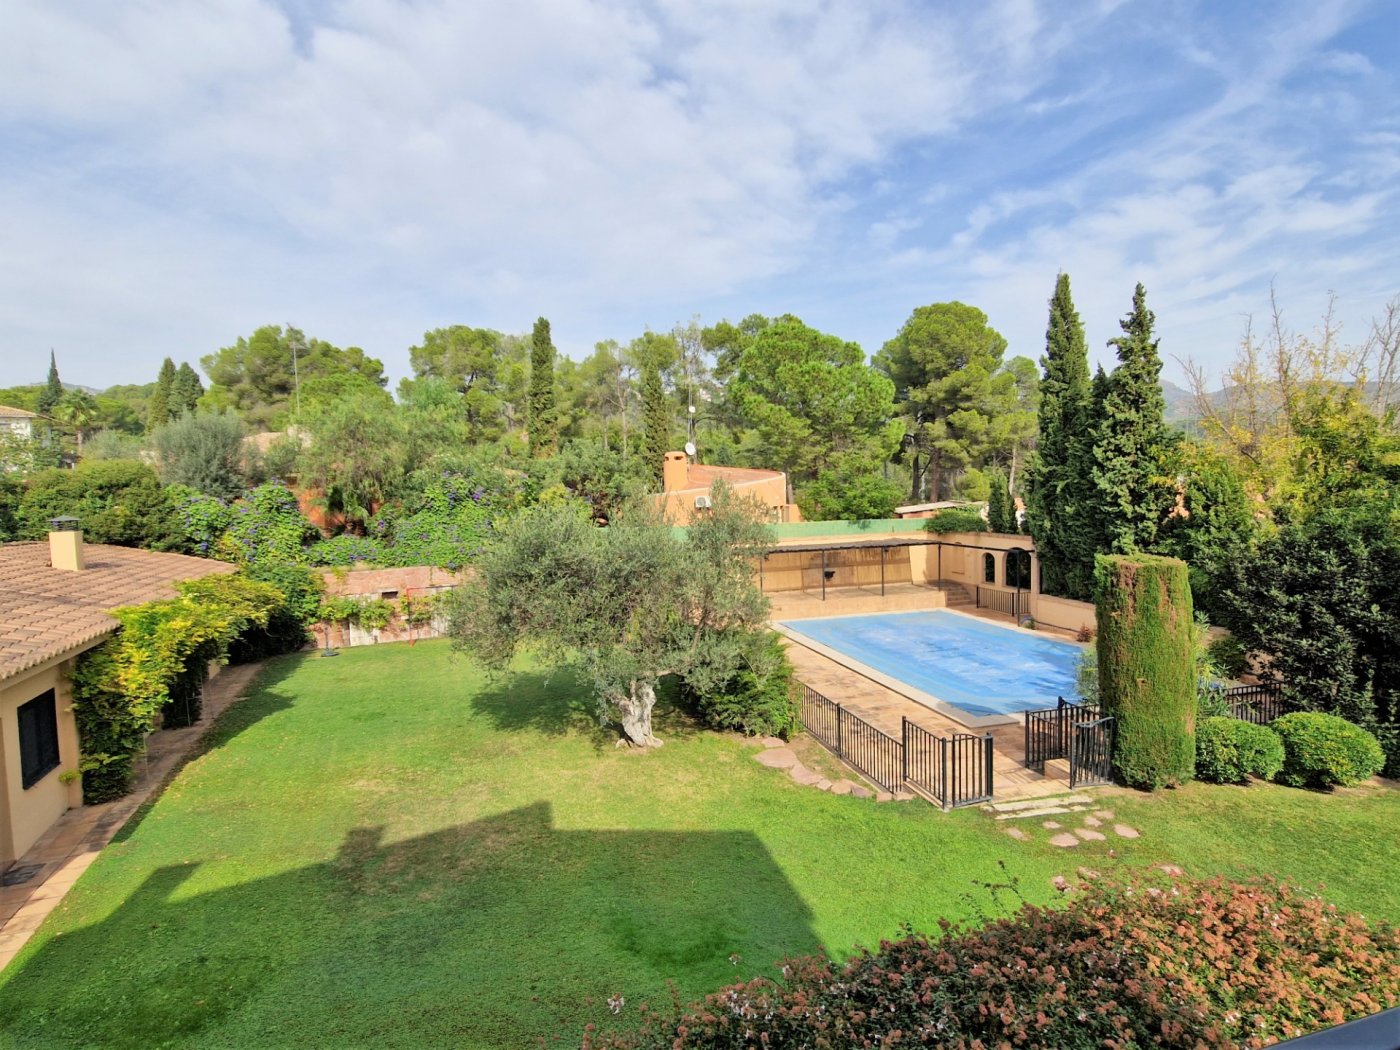 Villa for sale in Náquera, Valencia with large plot.